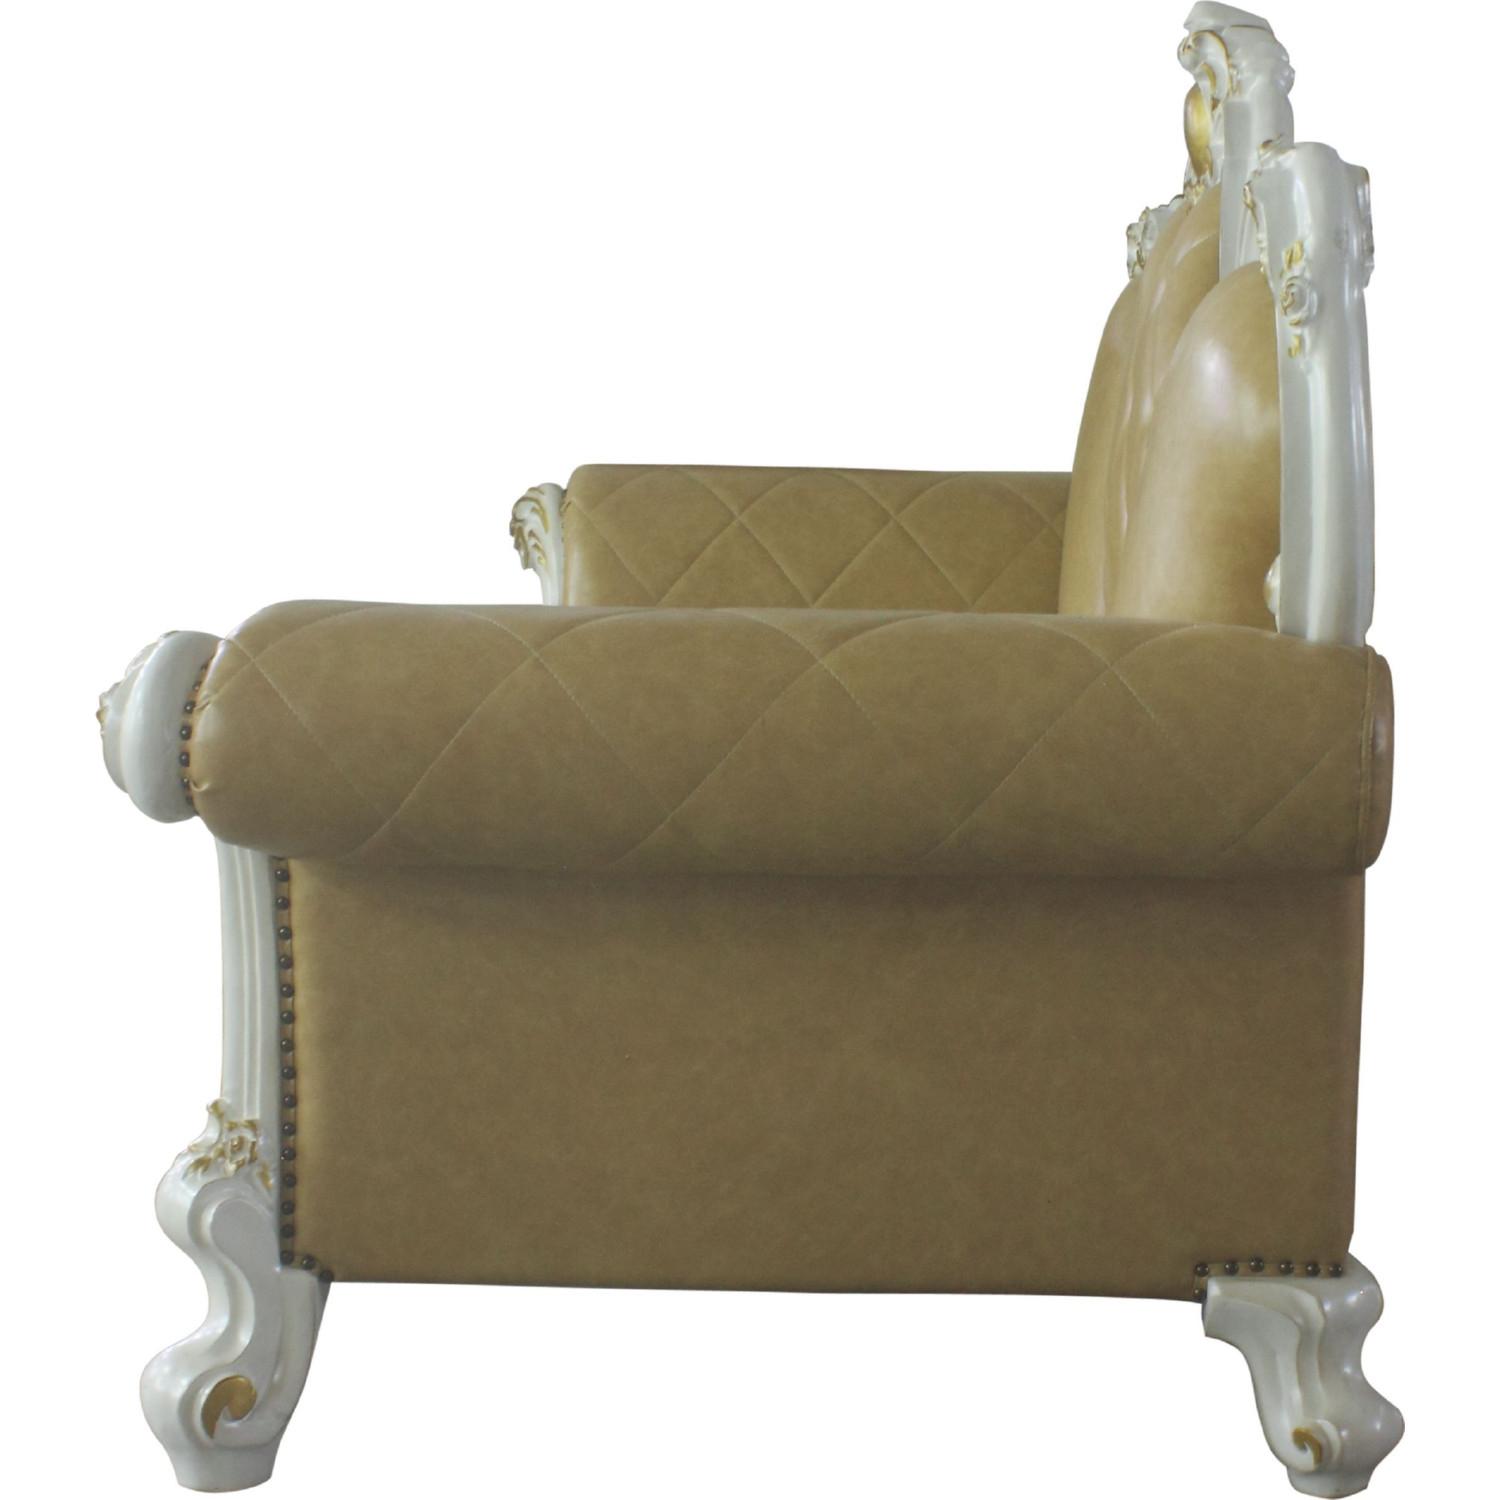 

    
Acme Furniture Picardy 58210 Sofa Pearl/Antique/Yellow 58210 Picardy
